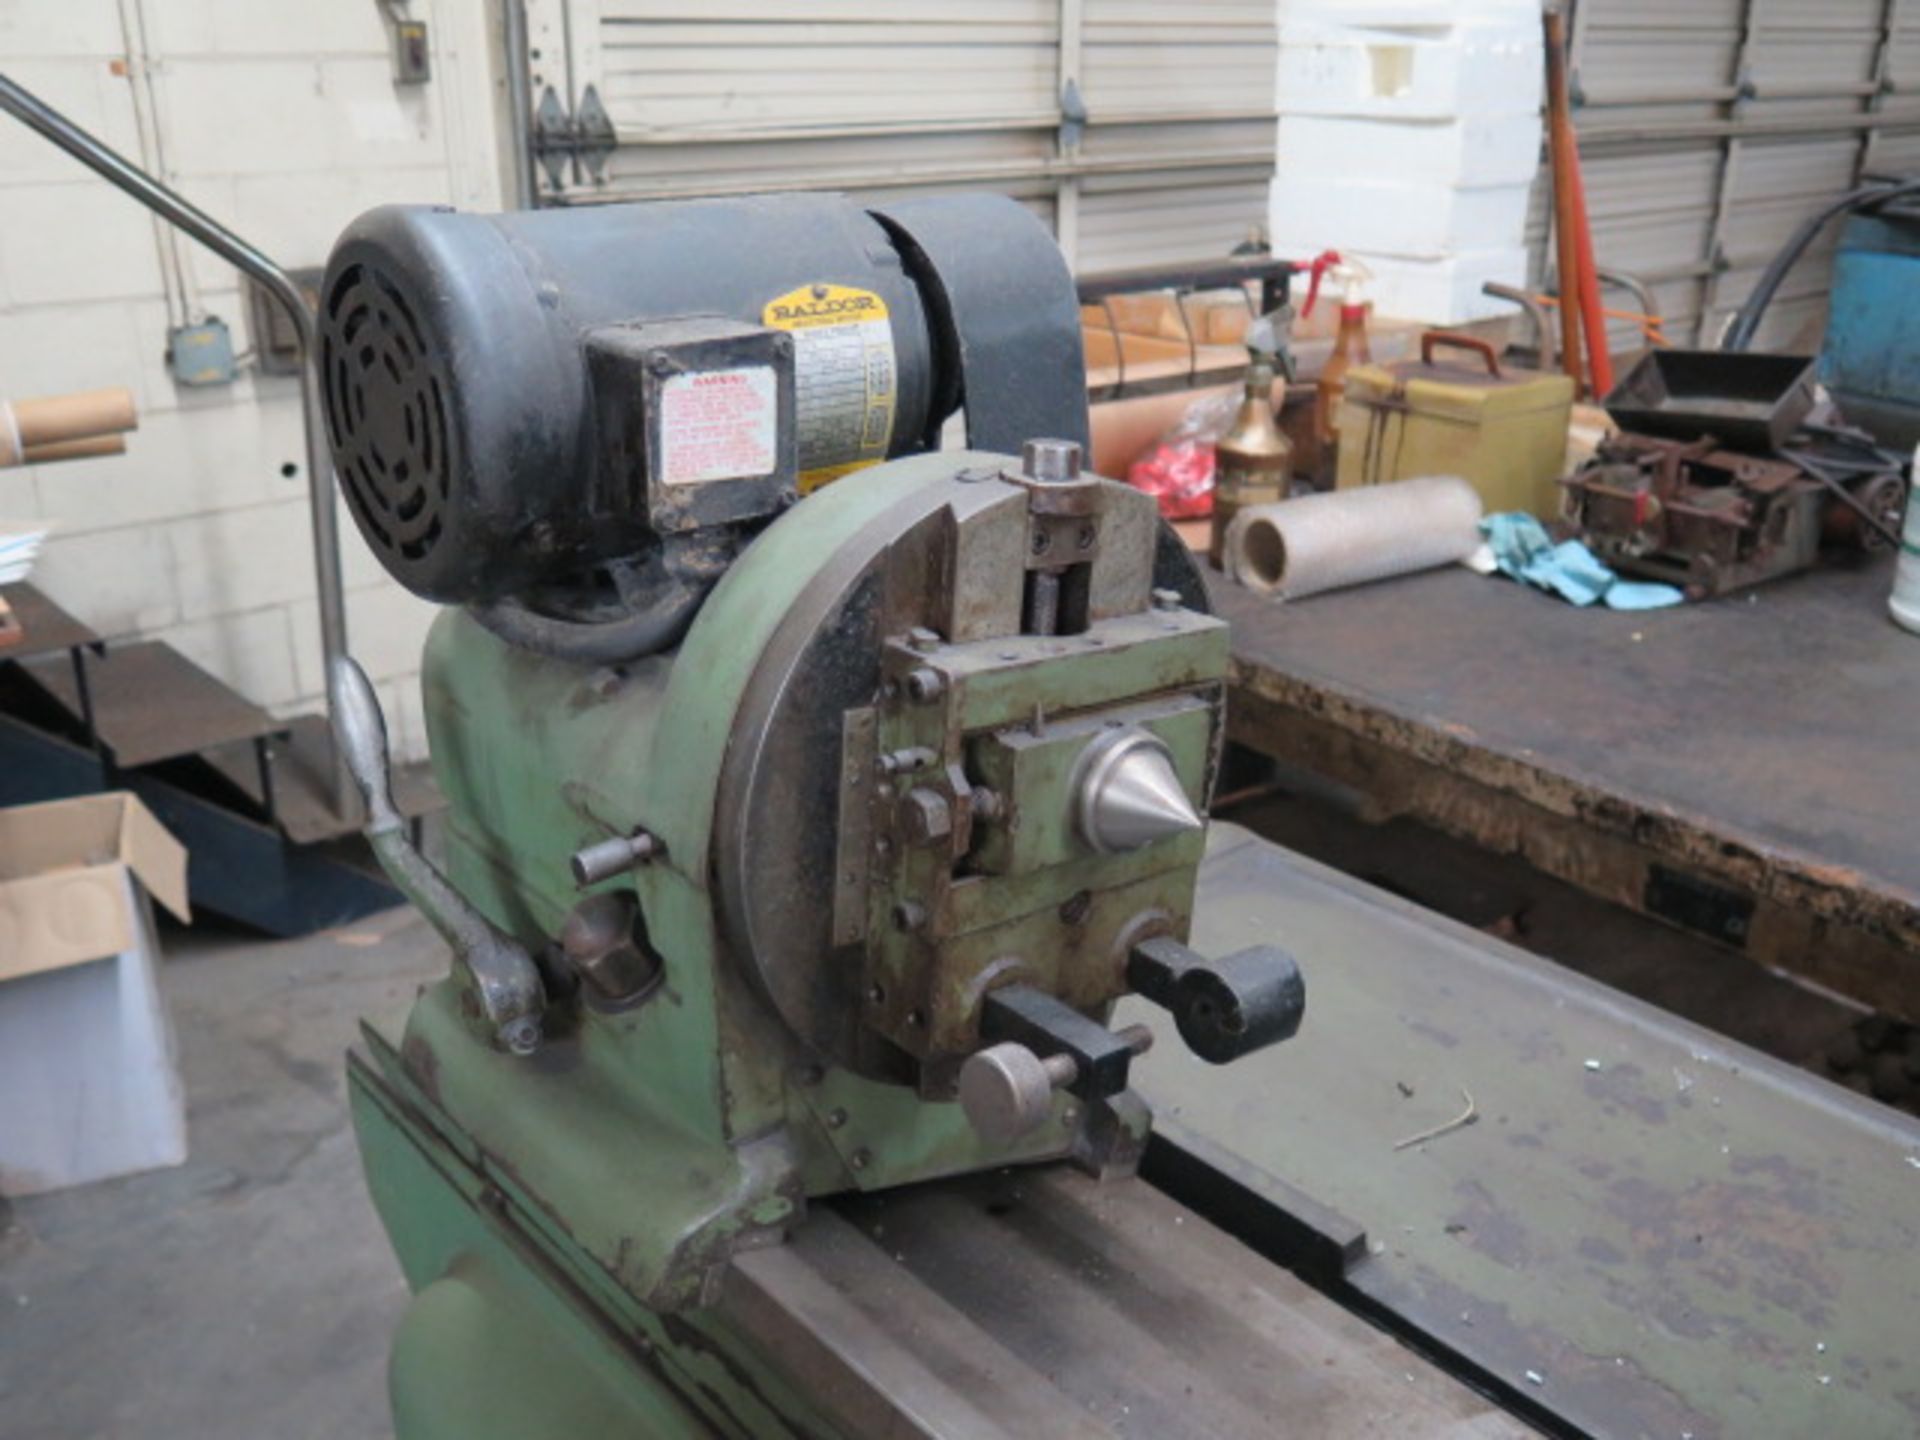 Storm Vulcan mdl. 15 Cam Shaft Grinder s/n 800-76 w/ Motorized Work Head, Tailstock, SOLD AS IS - Image 4 of 16